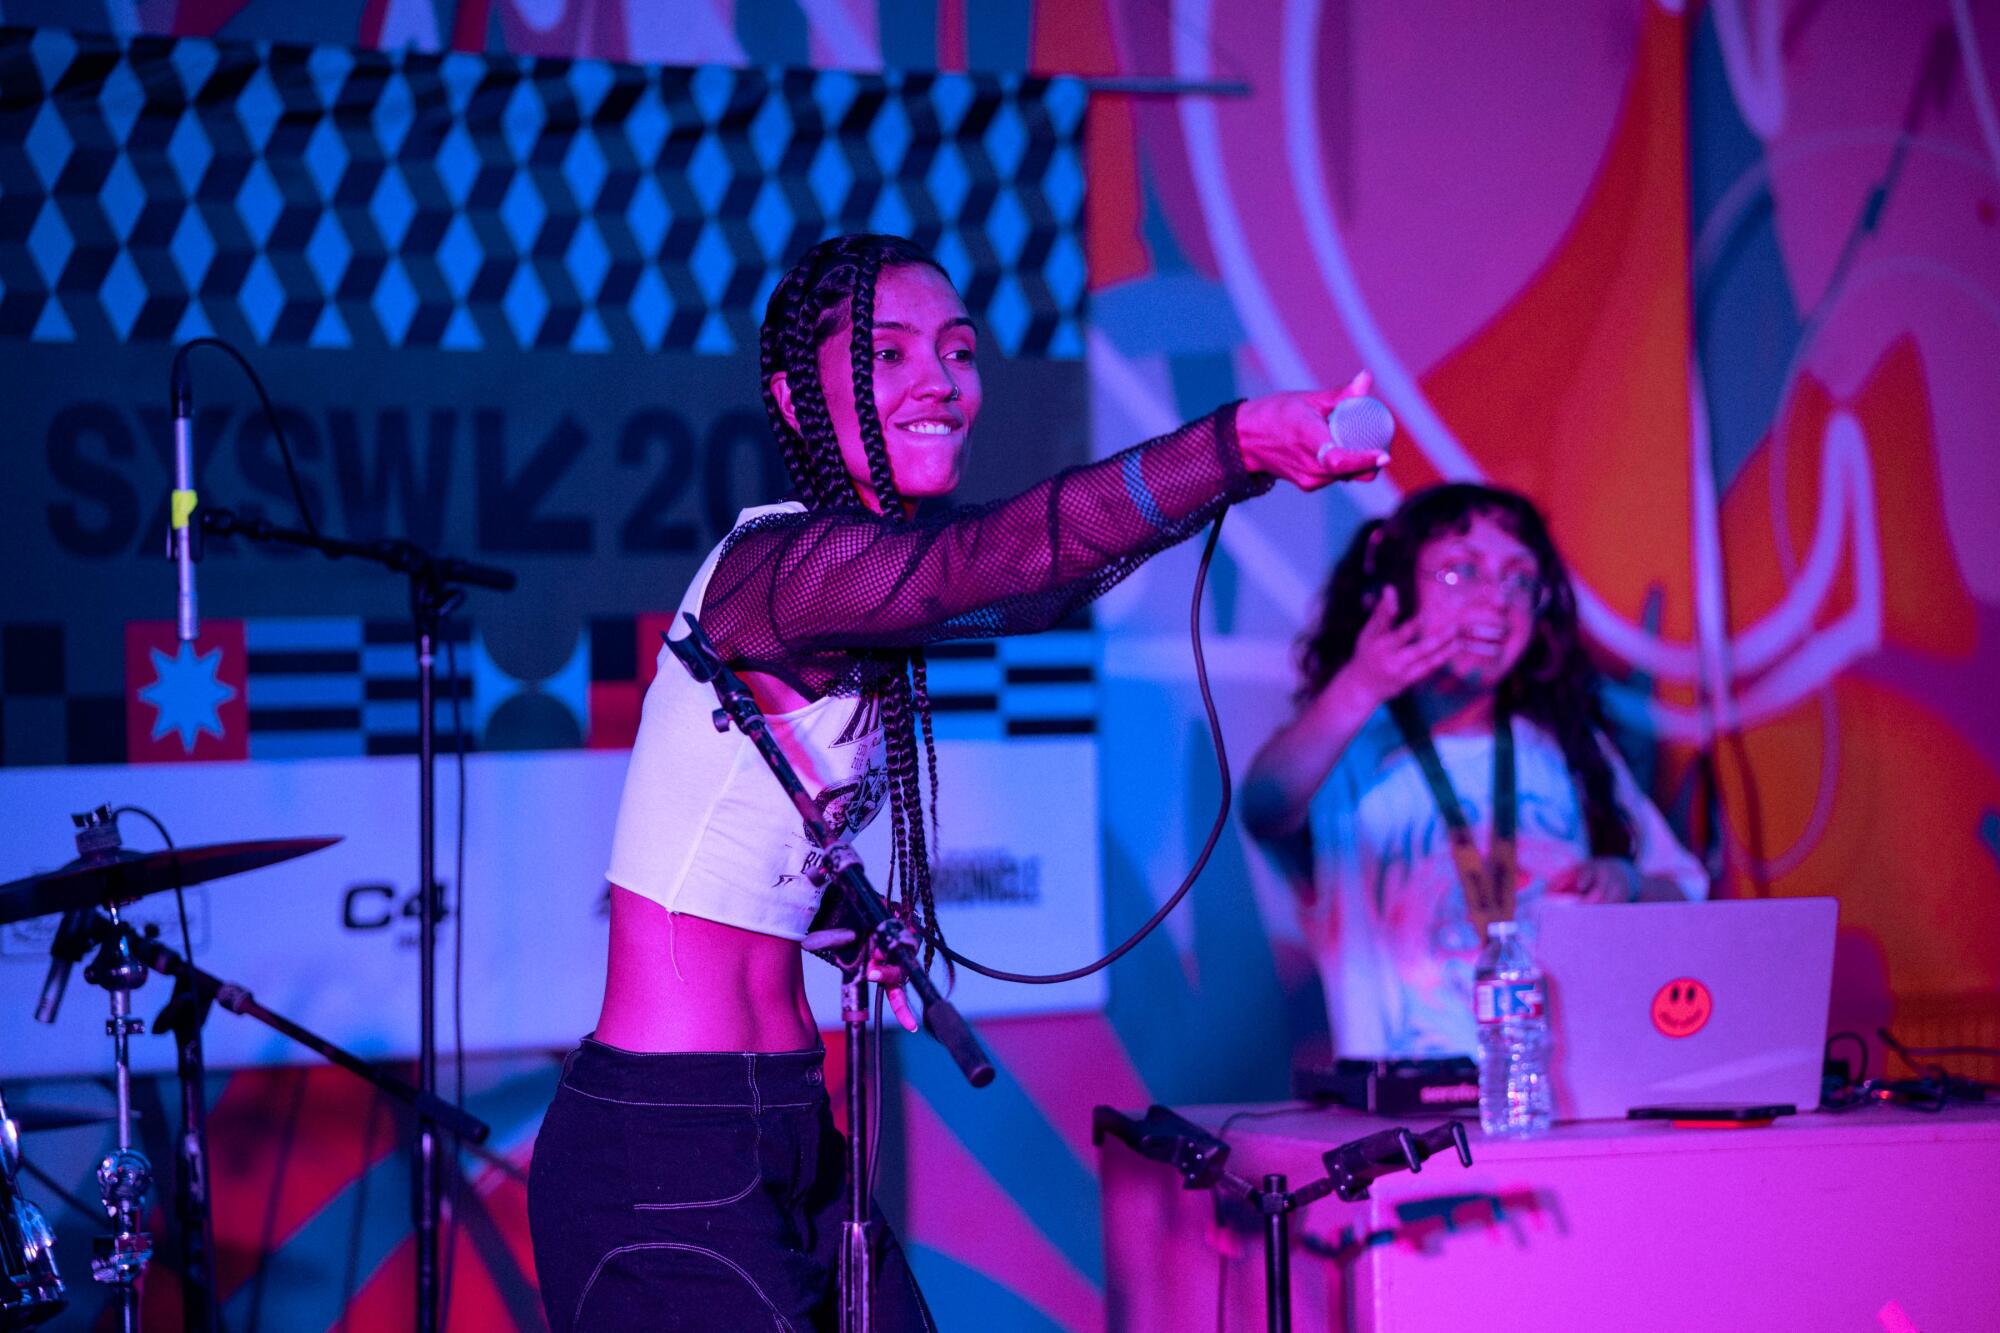 Nohemy performs her self-styled "exaggerated music" at De Los' showcase at SXSW on March 15.